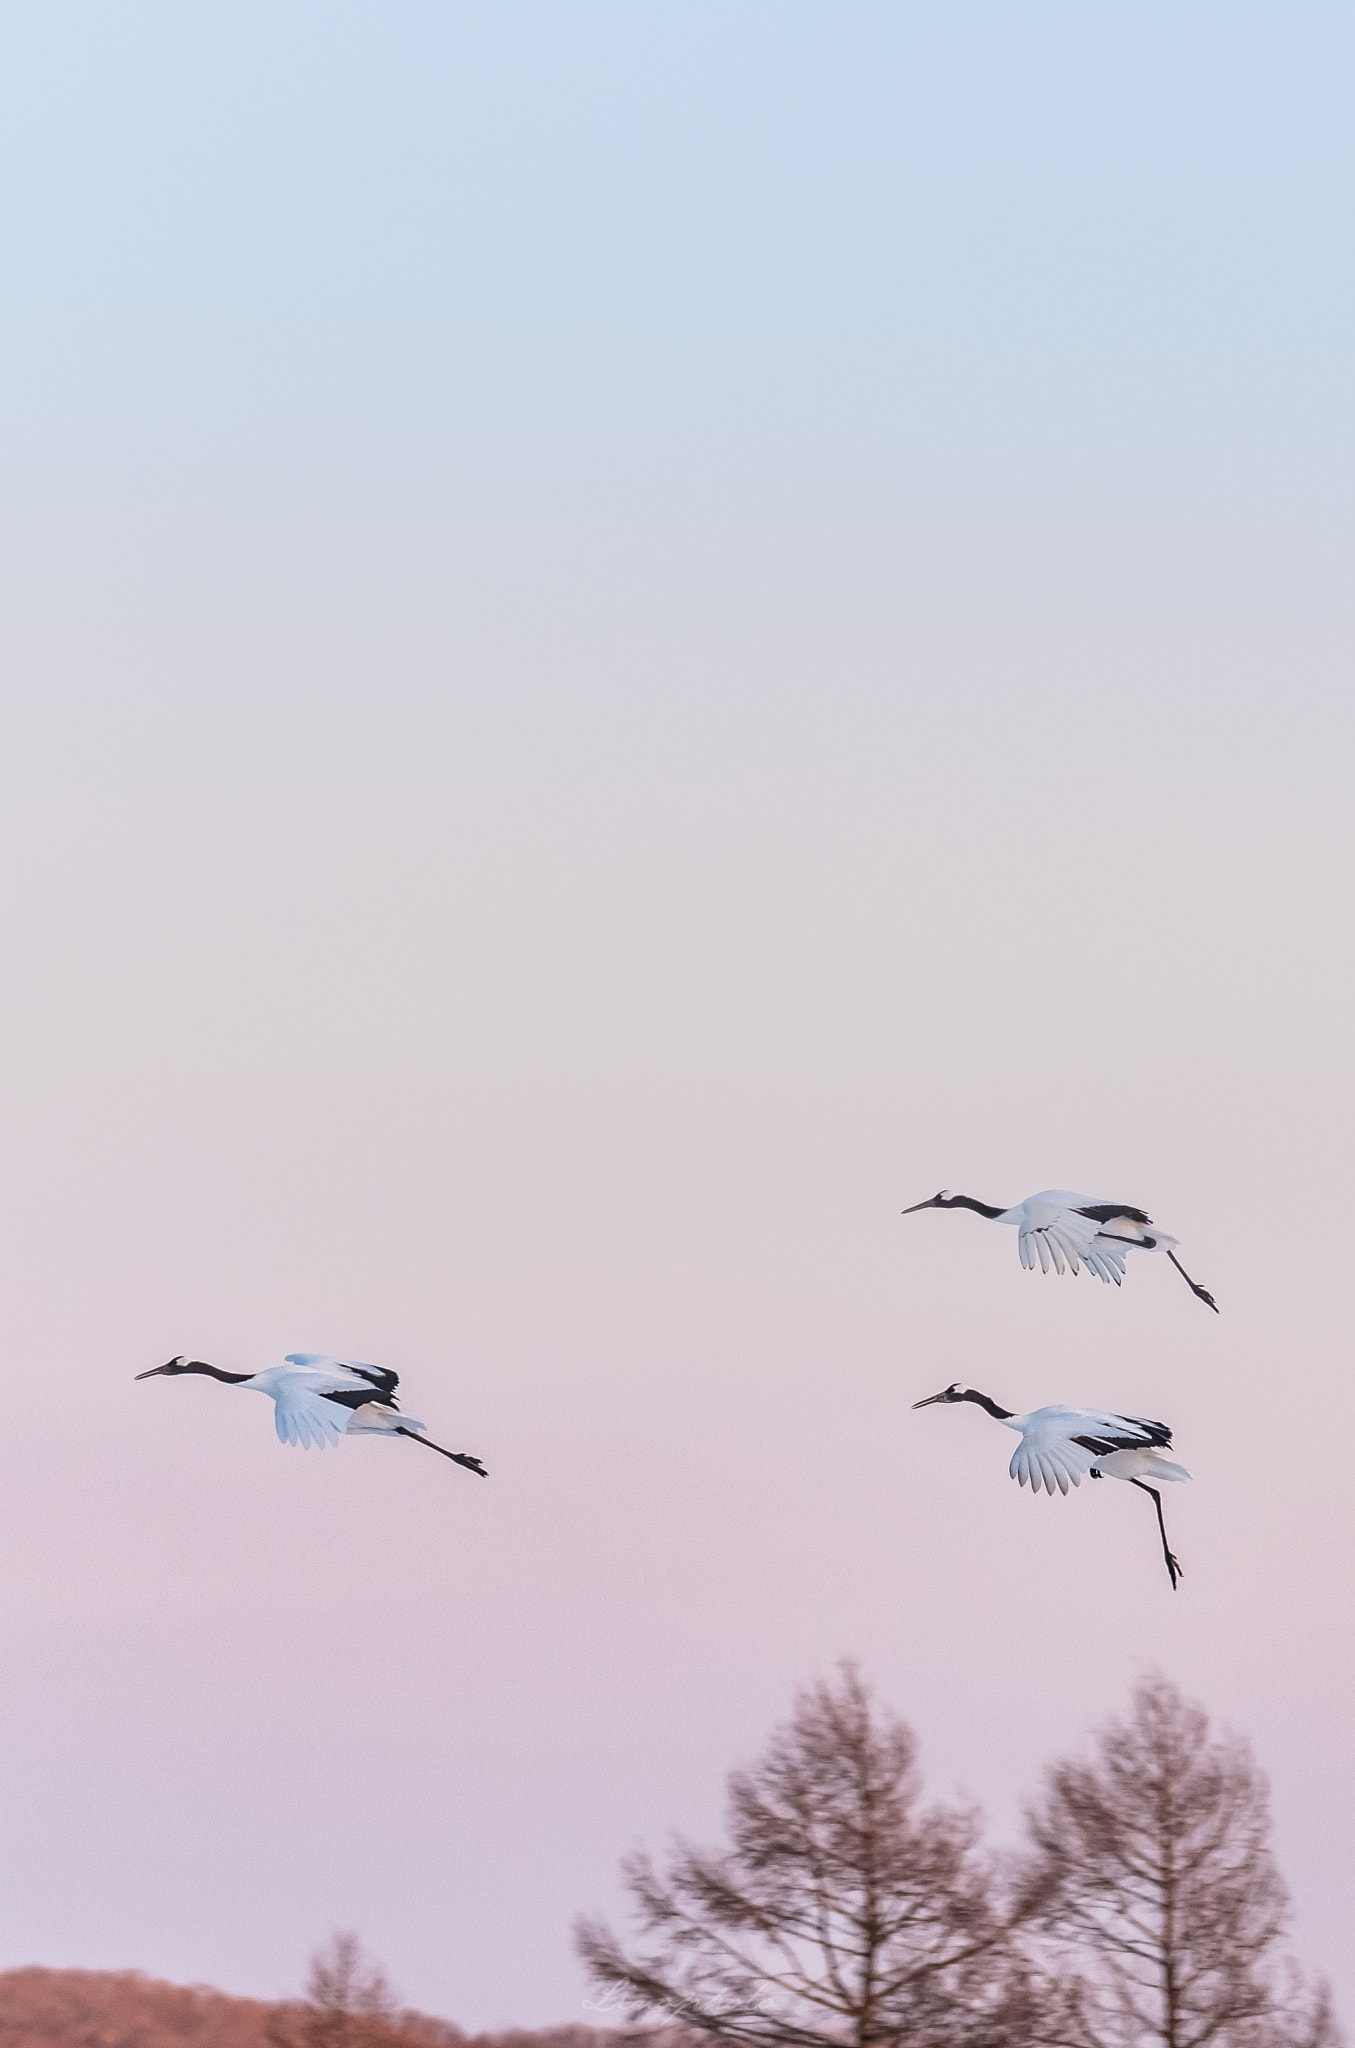 XF100-400mmF4.5-5.6 R LM OIS WR + 1.4x sample photo. Dance in the sky of a pale pink color. photography